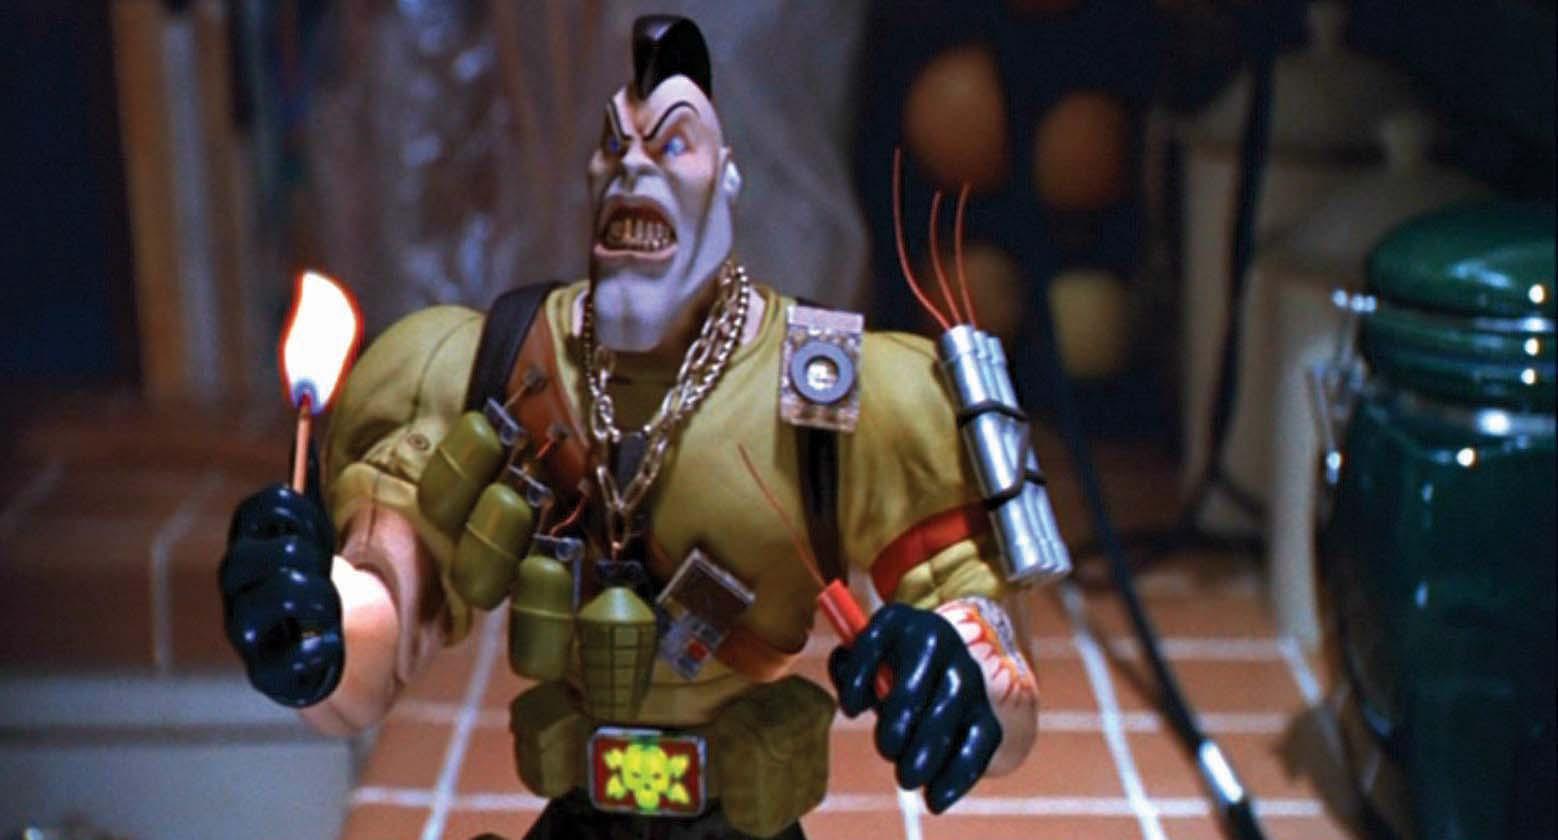 Small Soldiers Wallpaper High Quality